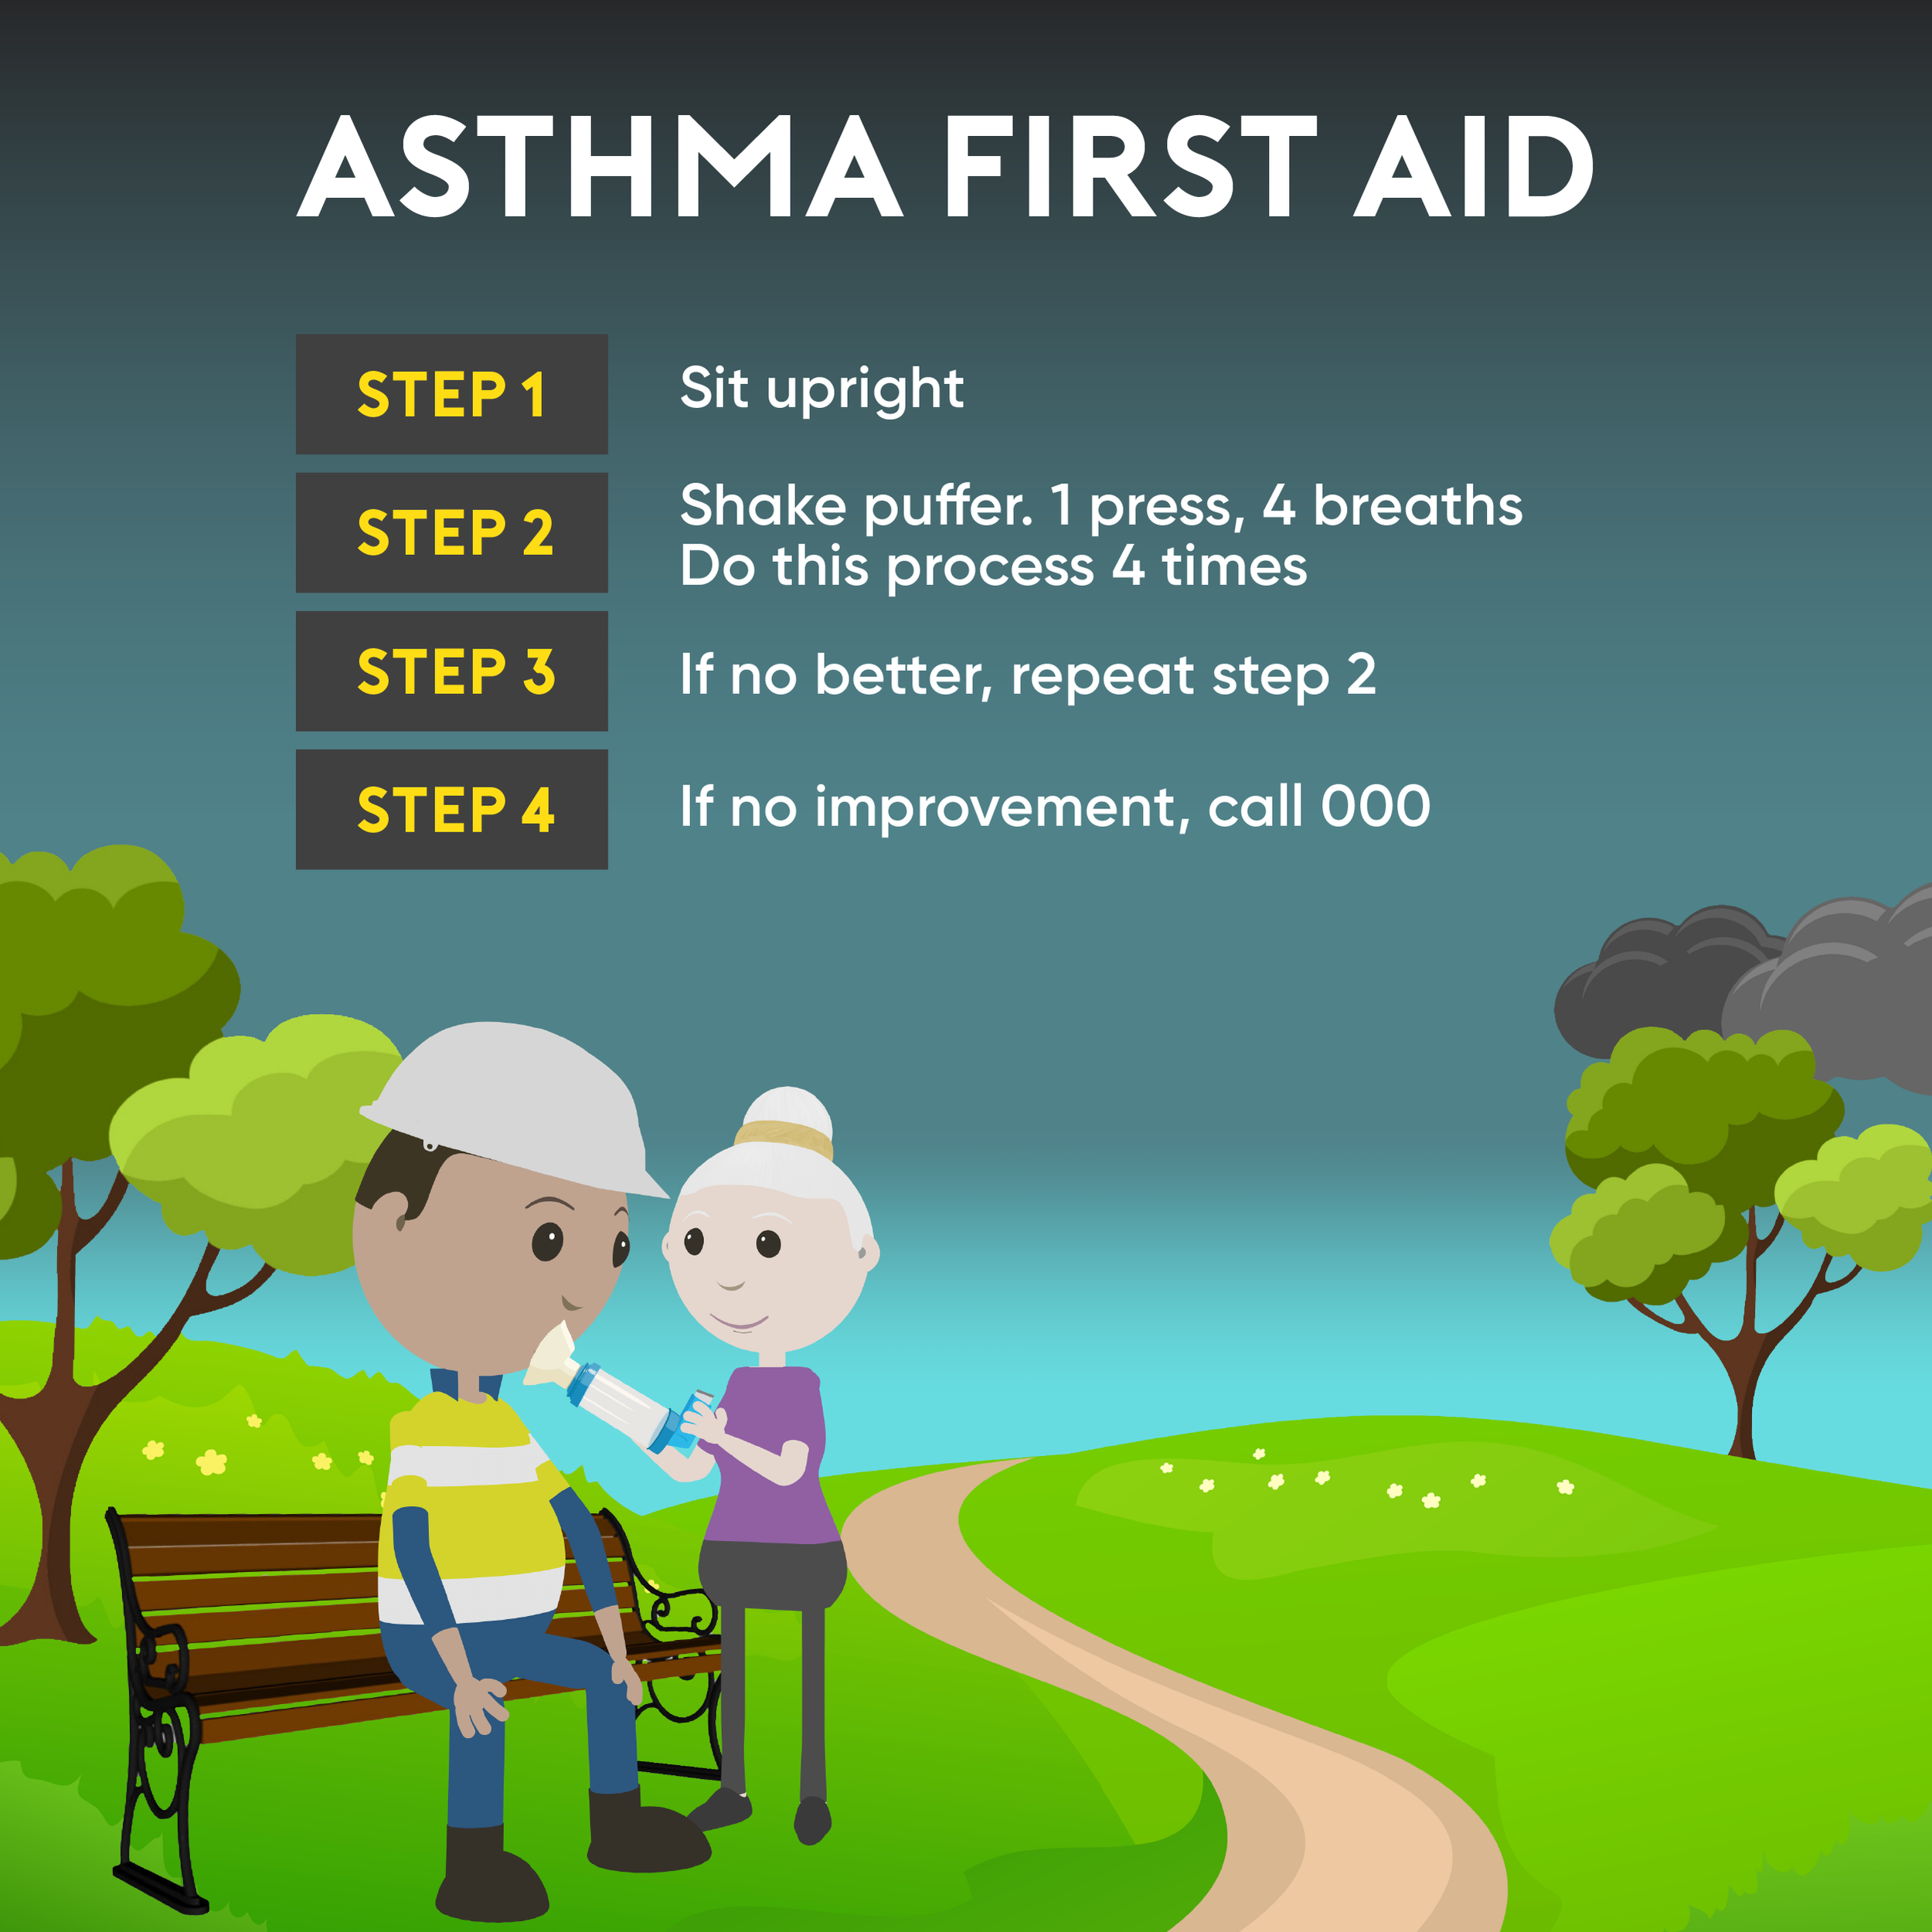 Asthma18_Tiles-05.png